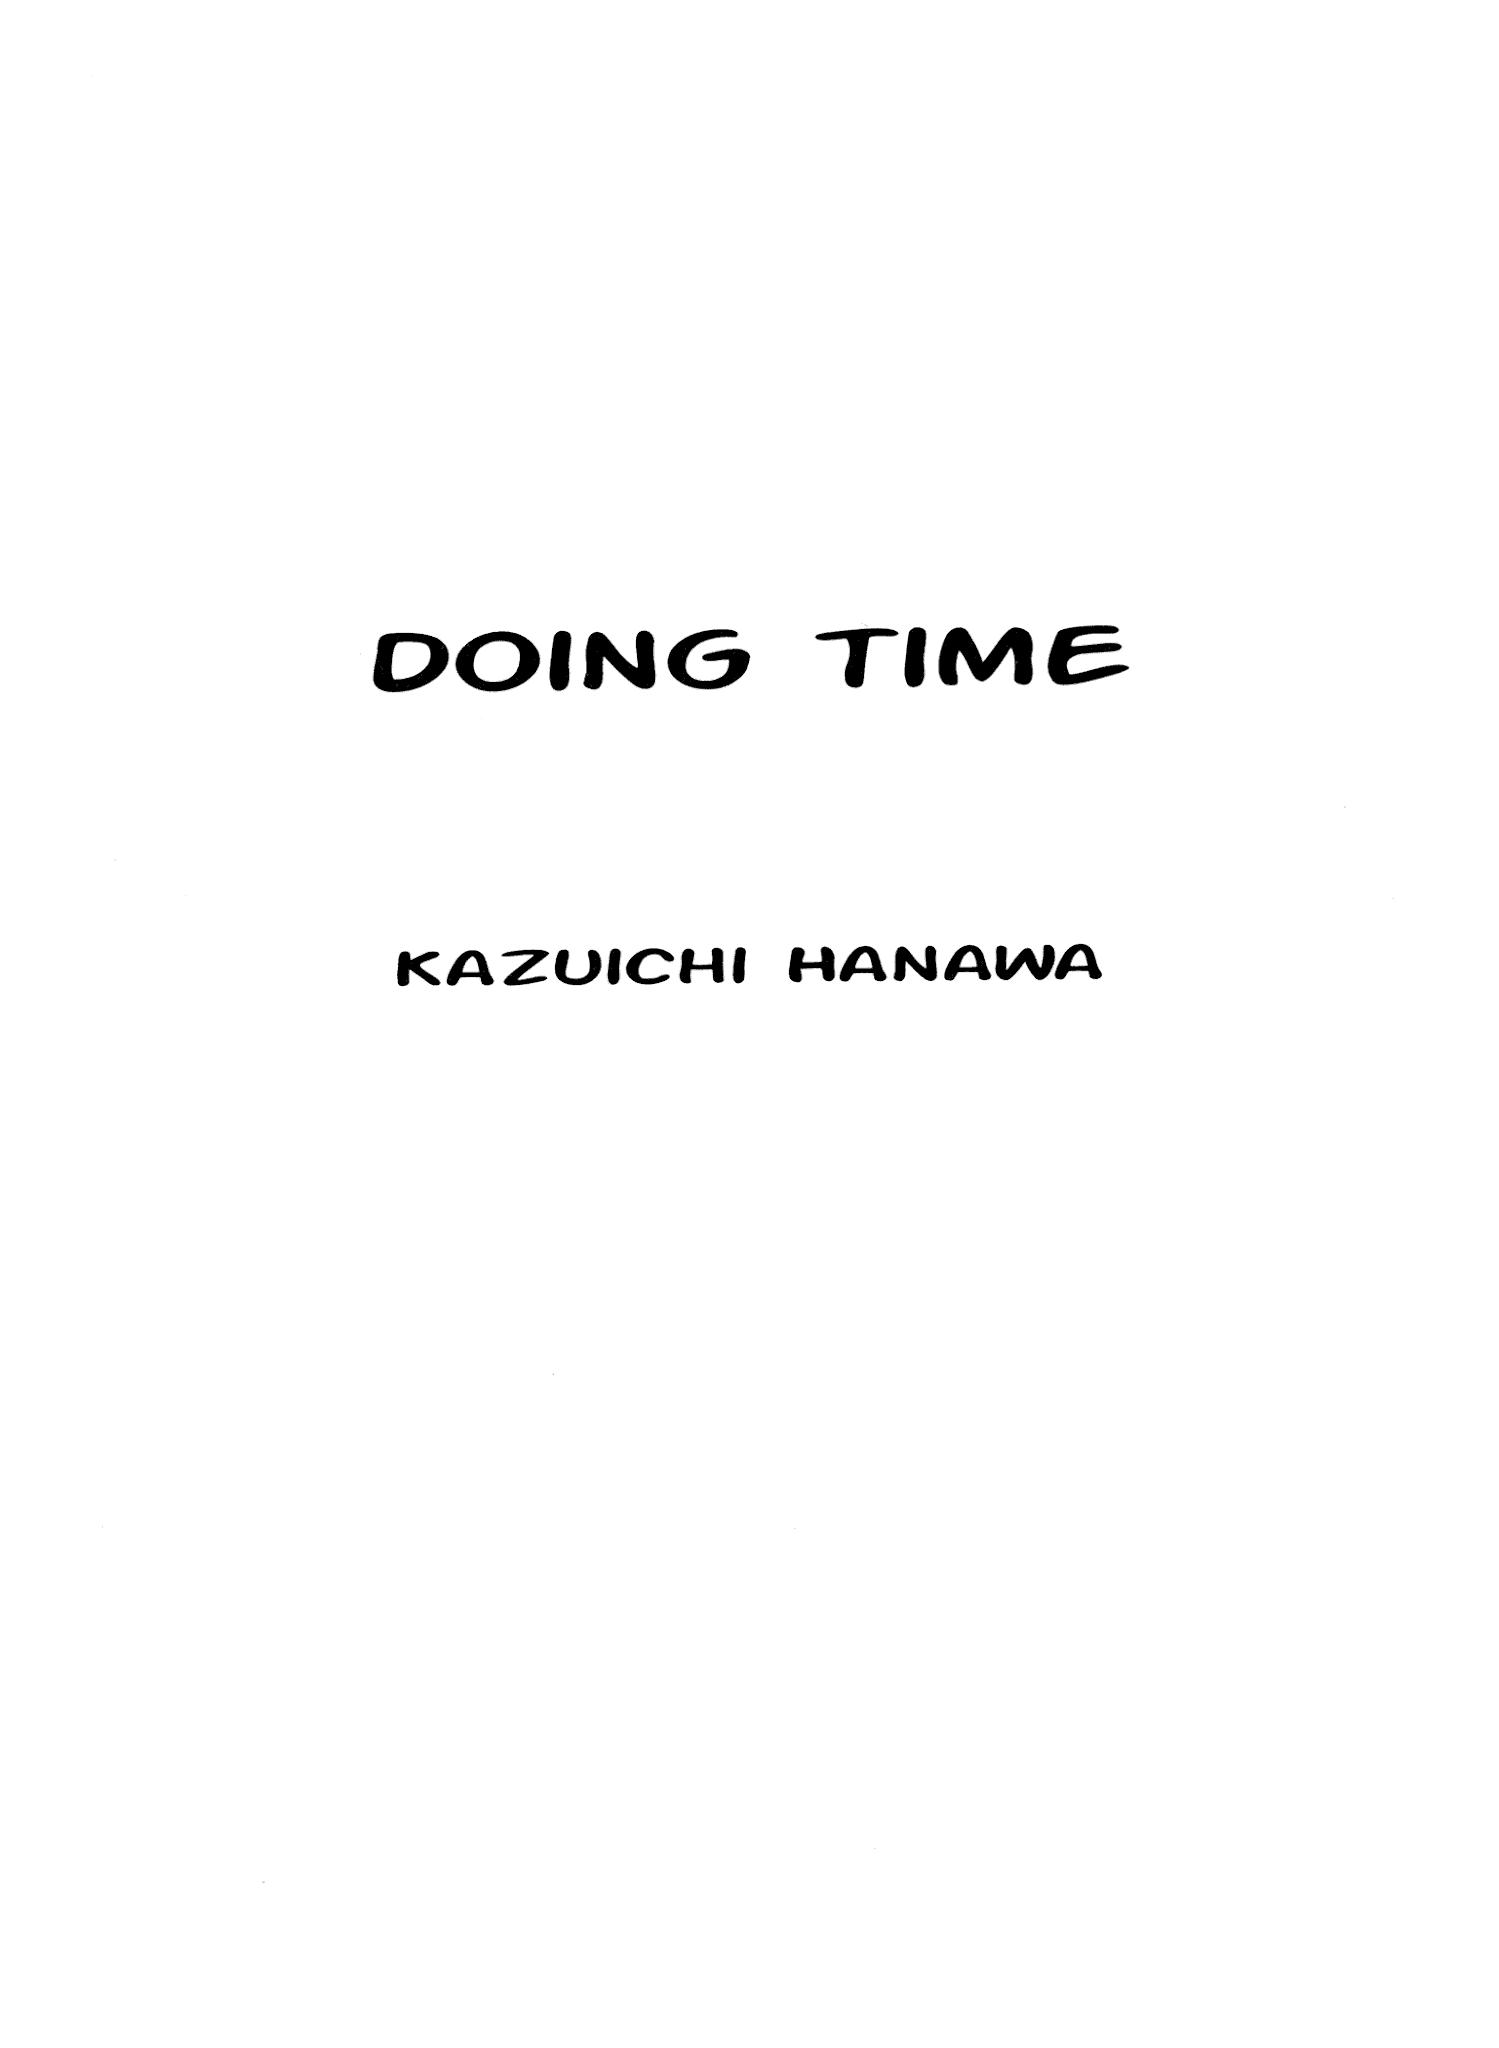 Doing Time - episode 1 - 5